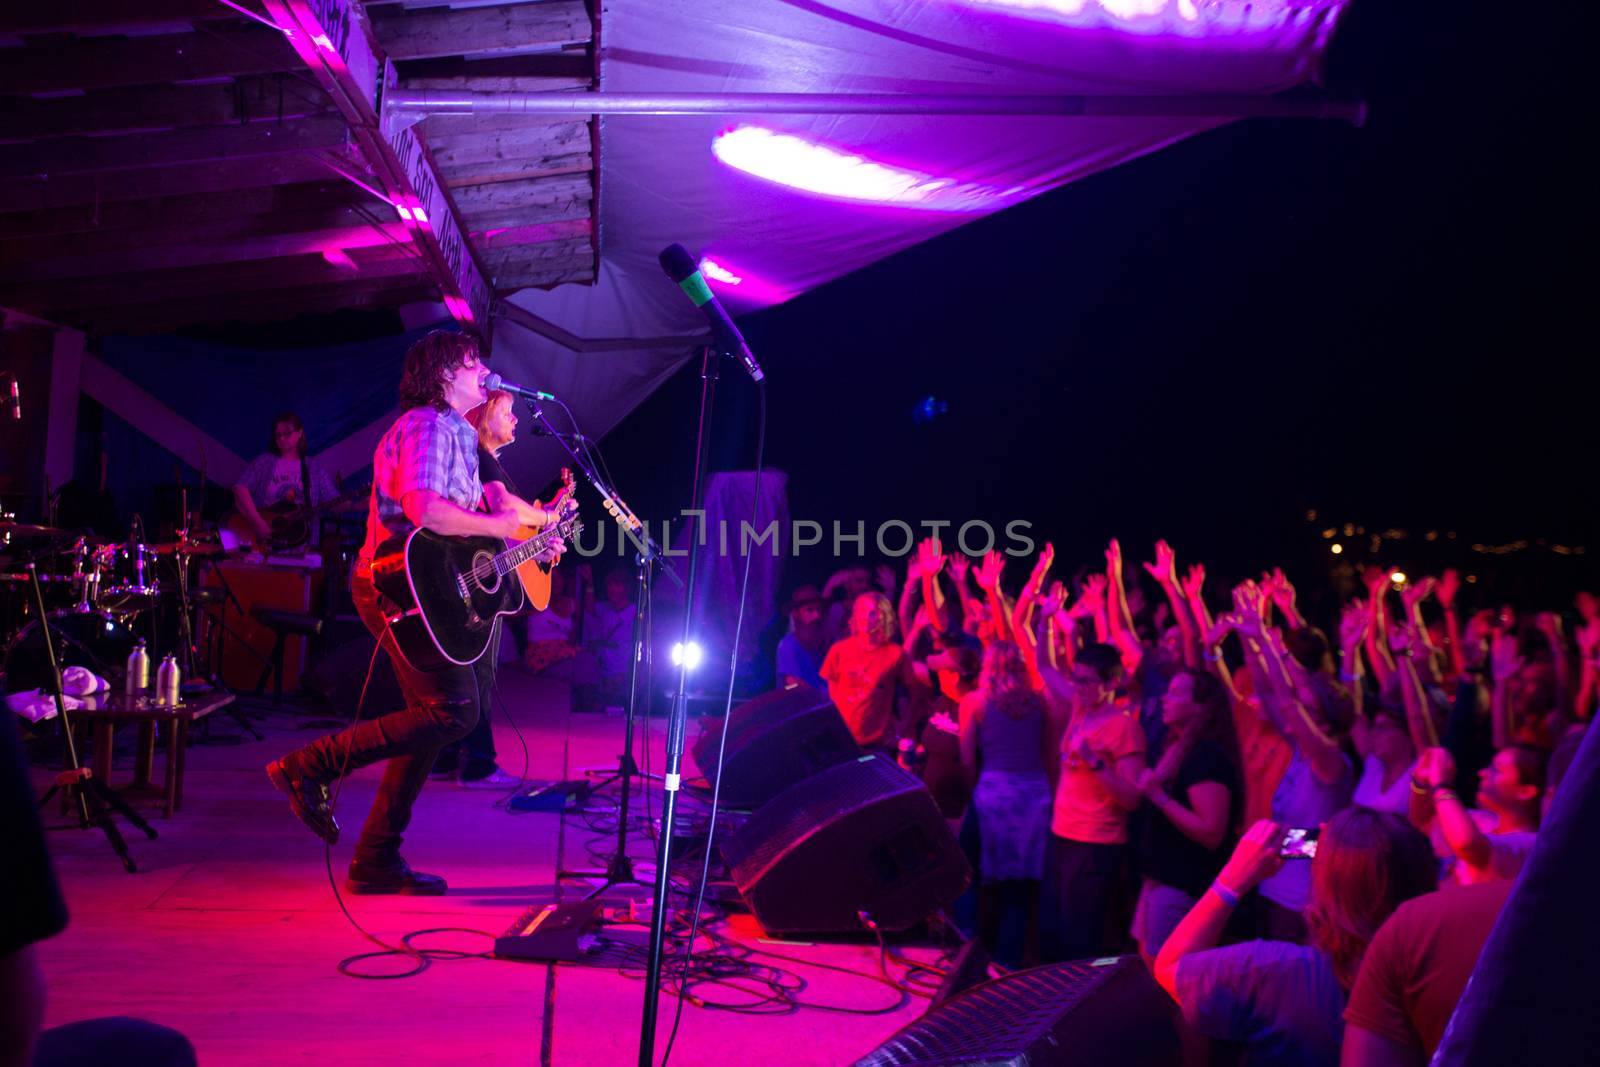 HOT SPRINGS, NC - AUGUST 10: An excited crowd waves while the Indigo Girls perform on stage at the Christian themed Wild Goose Festival on August 10, 2013 in Hot Springs, NC, USA